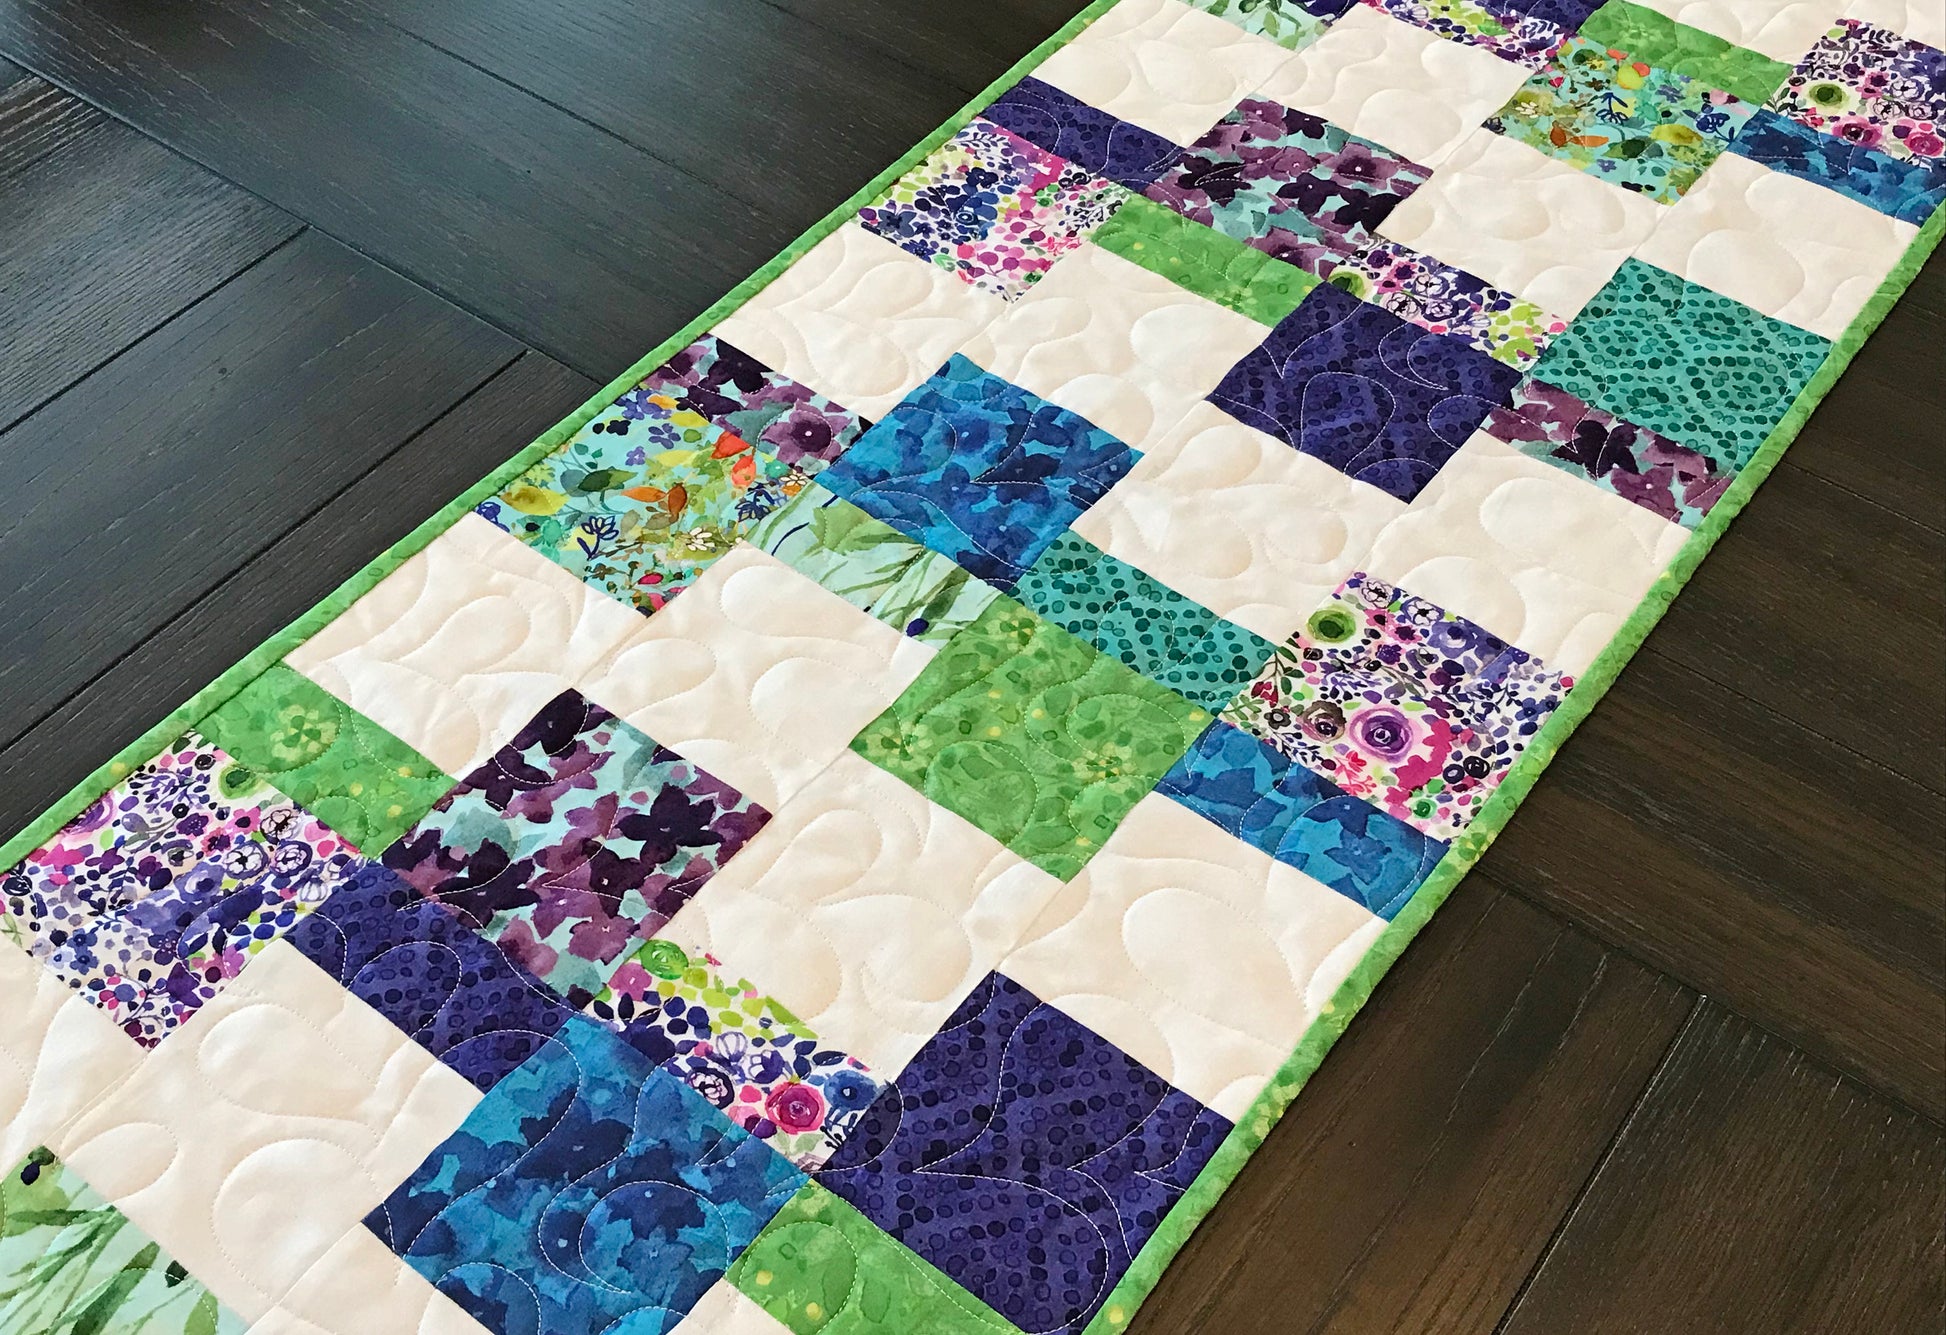 Watercolor Floral Table Runner - Handmade Quilts, Digital Patterns, and Home Décor items online - Cuddle Cat Quiltworks